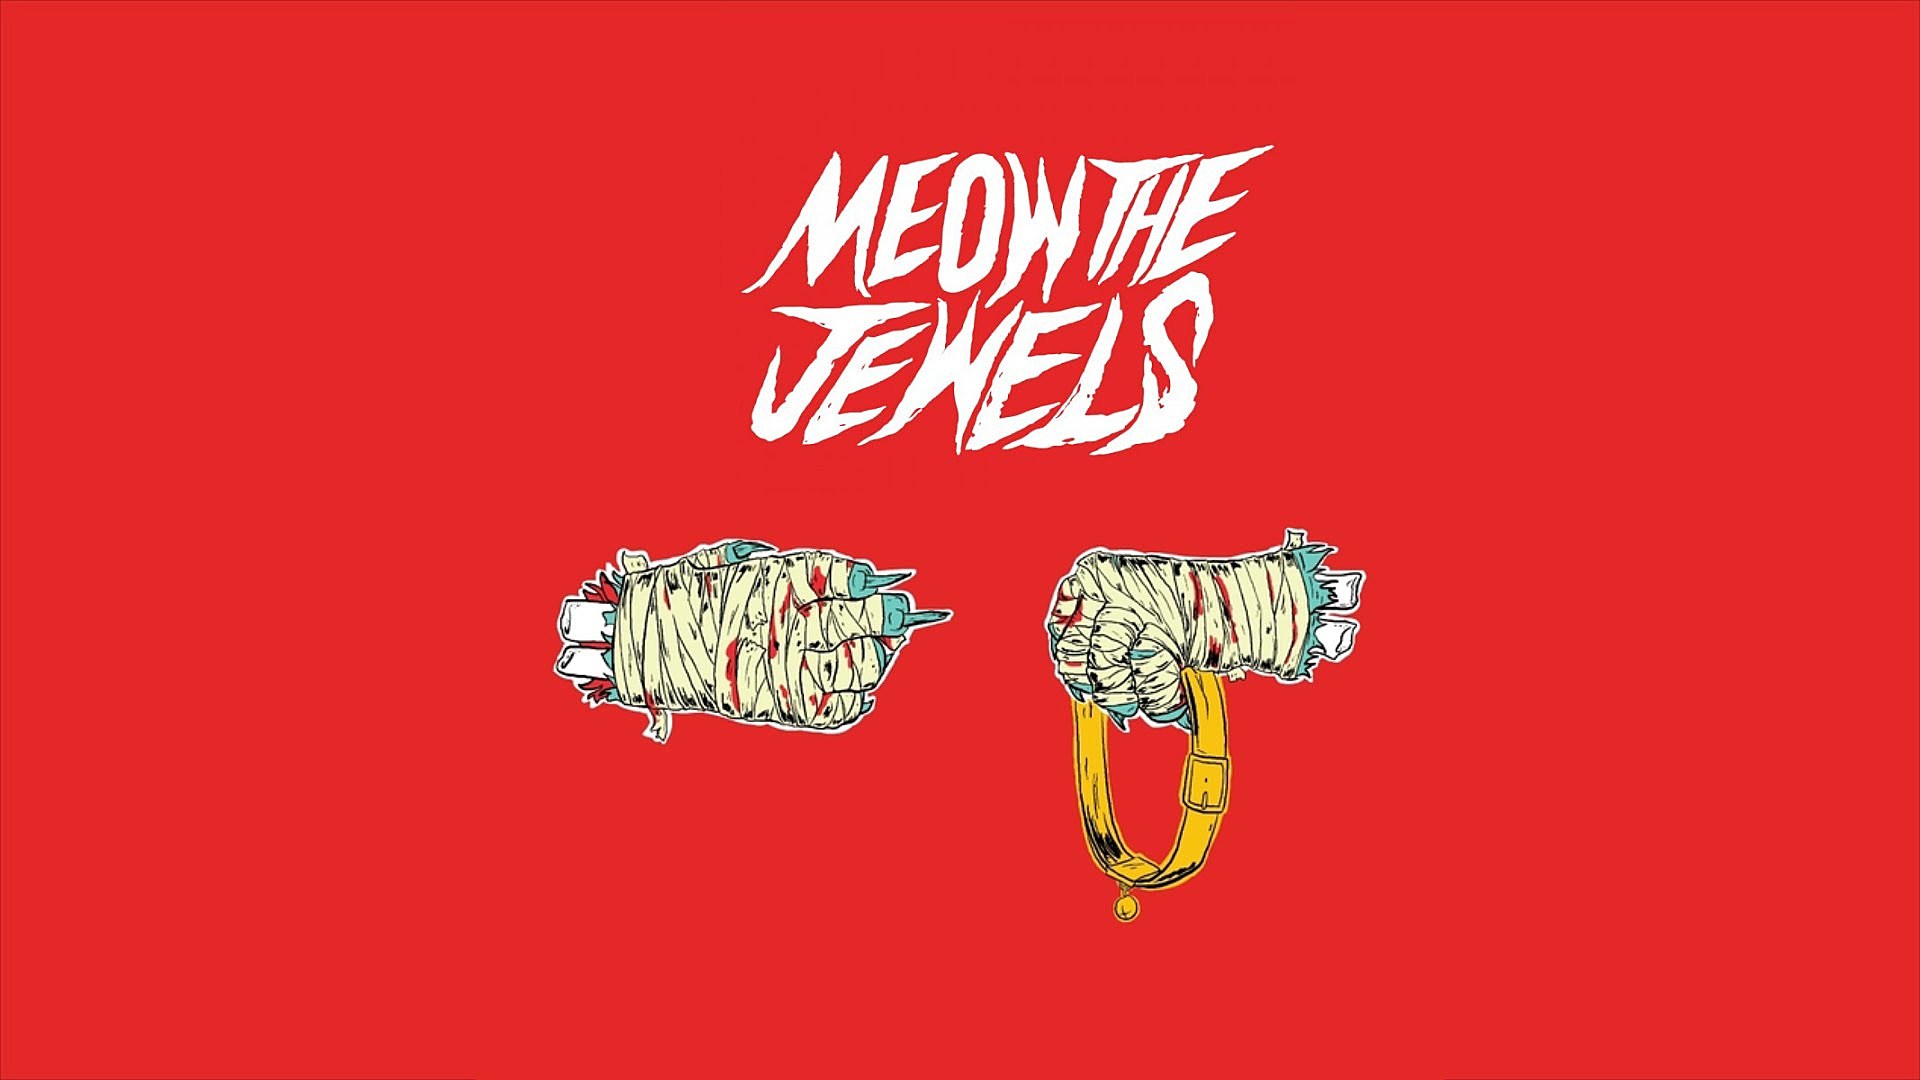 El-P Previews Alchemist-Produced 'Meow The Jewels' Song - XXL